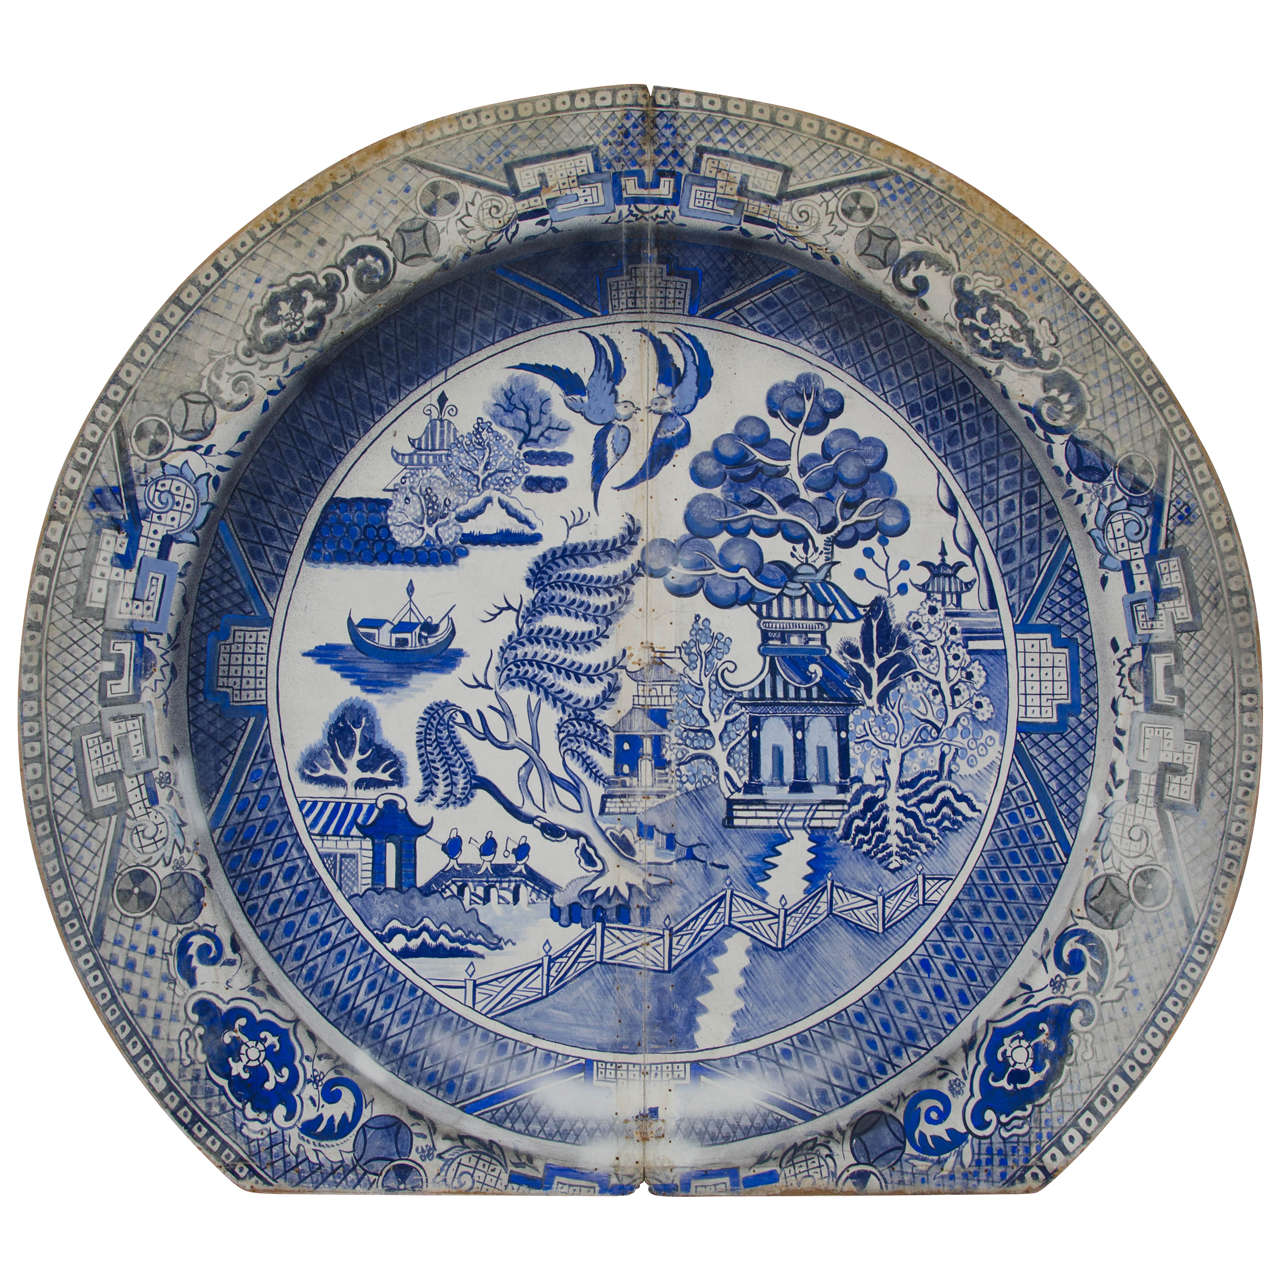 Huge Screen or Wall Hanging in the Form of a Willow Pattern Plate